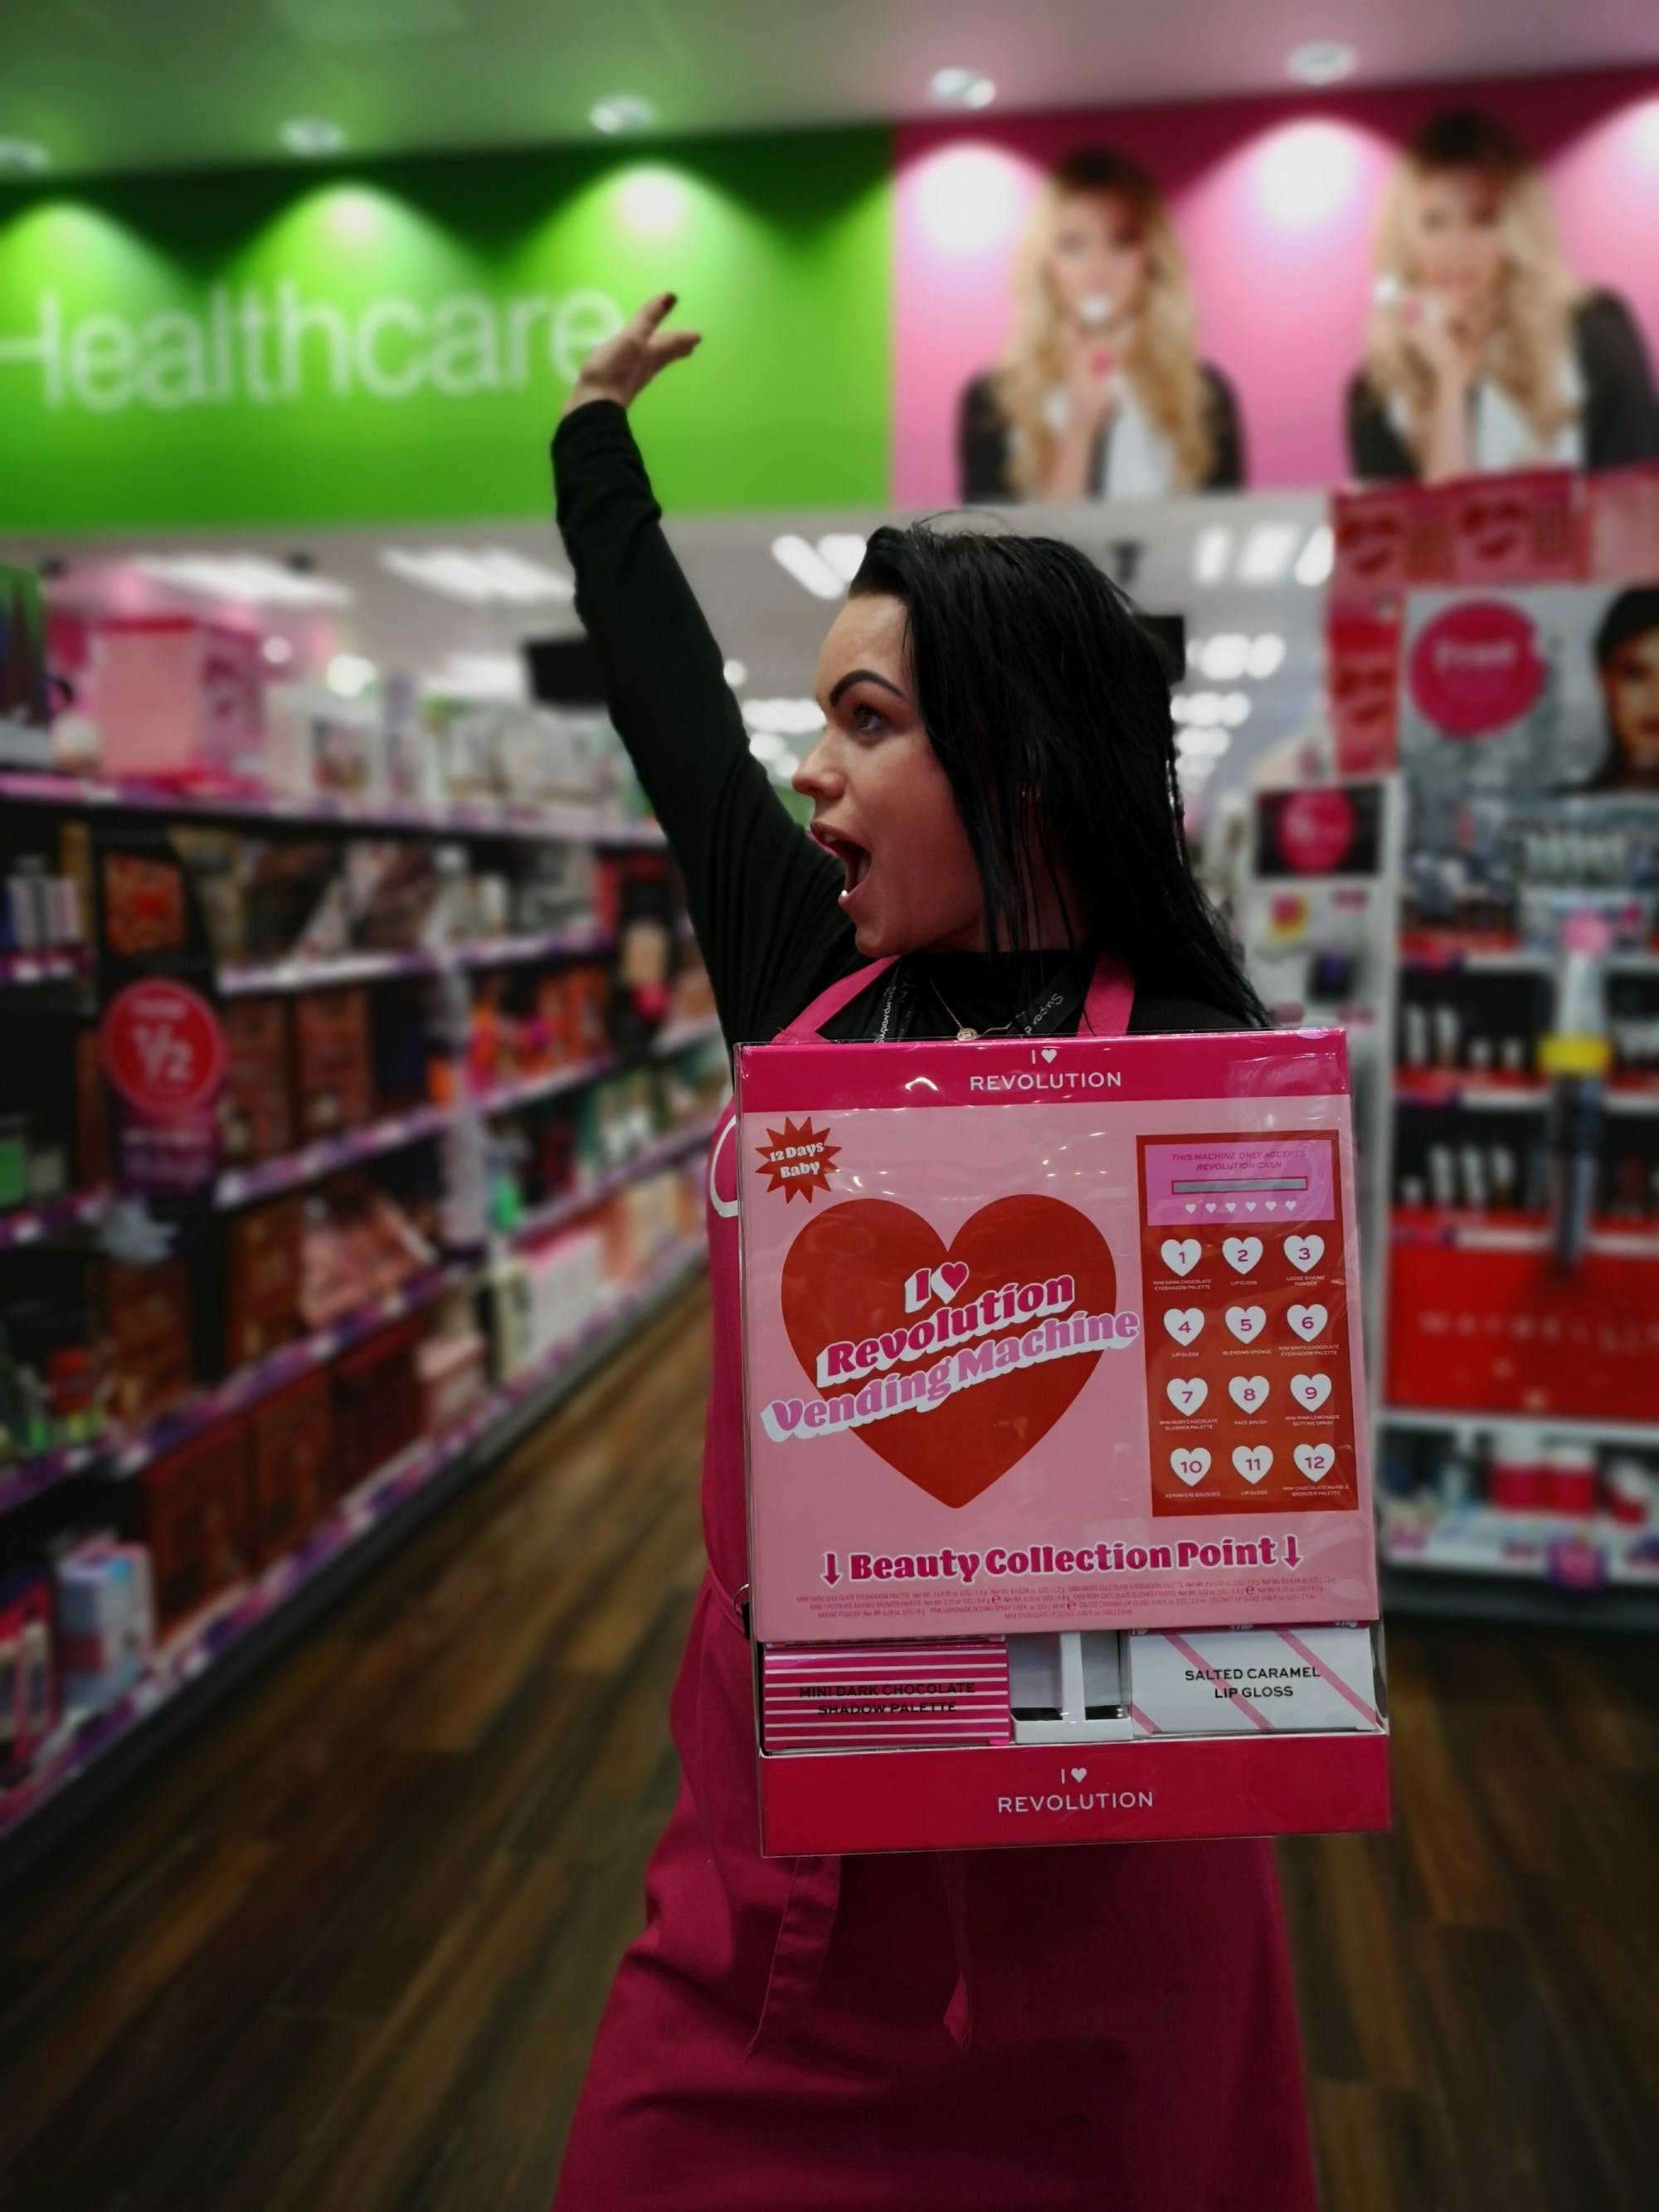 A vending machine for beauty products! Oh Superdrug. That's why Lesleyann is so happy! £30 feat. blusher, eye shadow & more